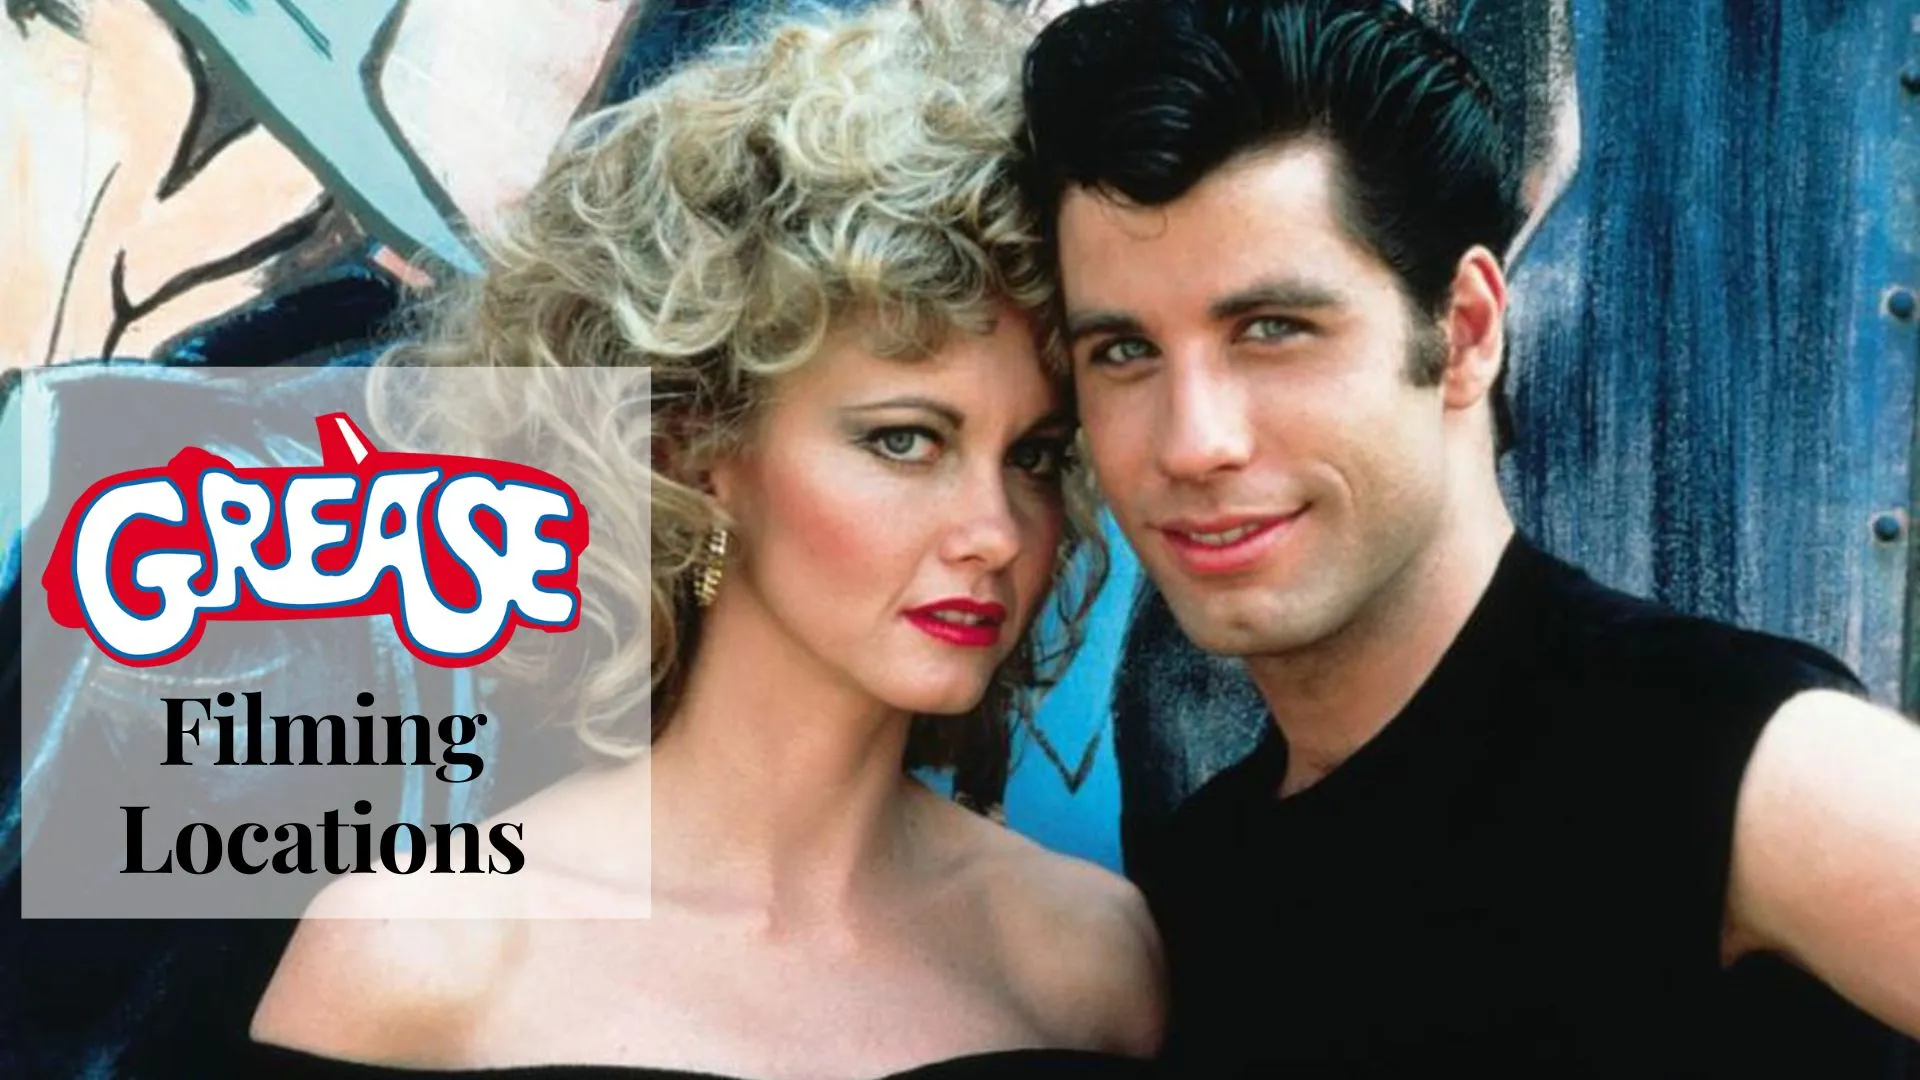 Grease Filming Locations